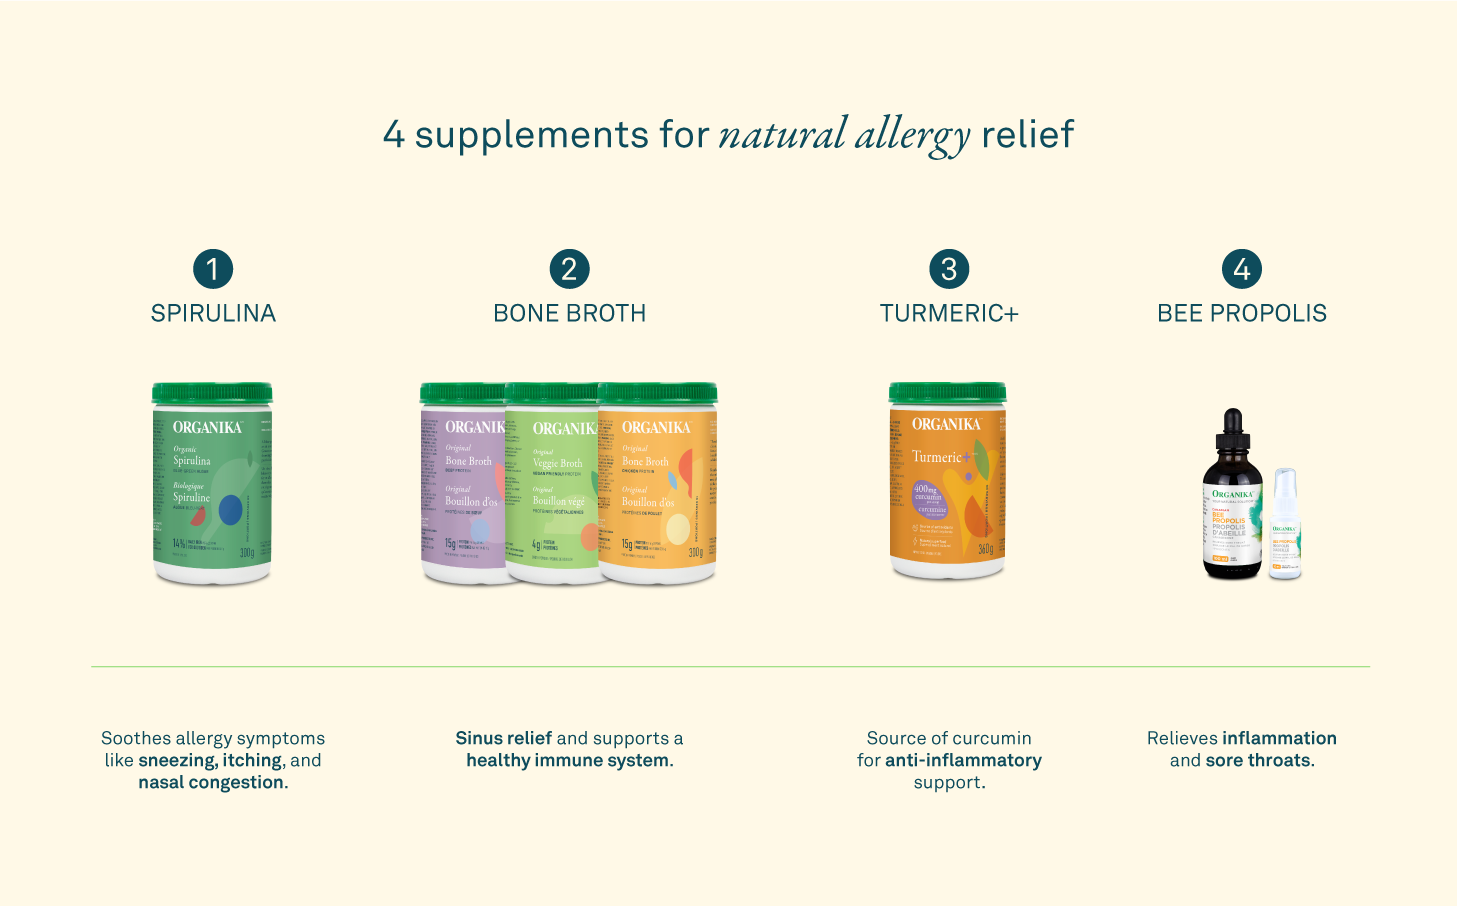 Natural allergy relief supplements